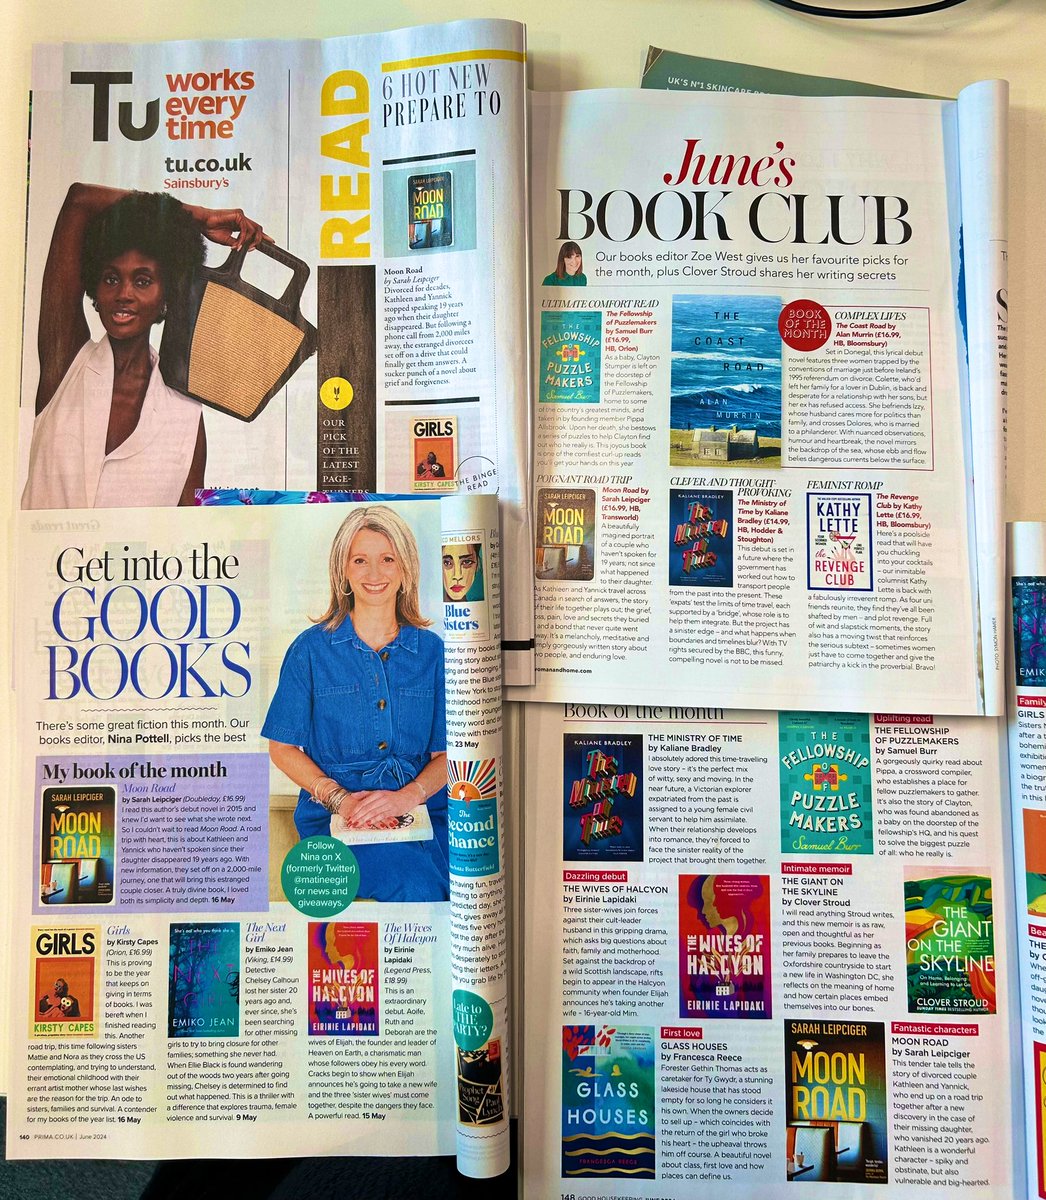 The hugest happiest publication day to @SarahLeipciger and her wonderful novel MOON ROAD - a book which transforms every reader it meets 🌖💙 if you don’t believe me, just look at these fabulous, generous reviews across the monthly mags 👇🏼🤩